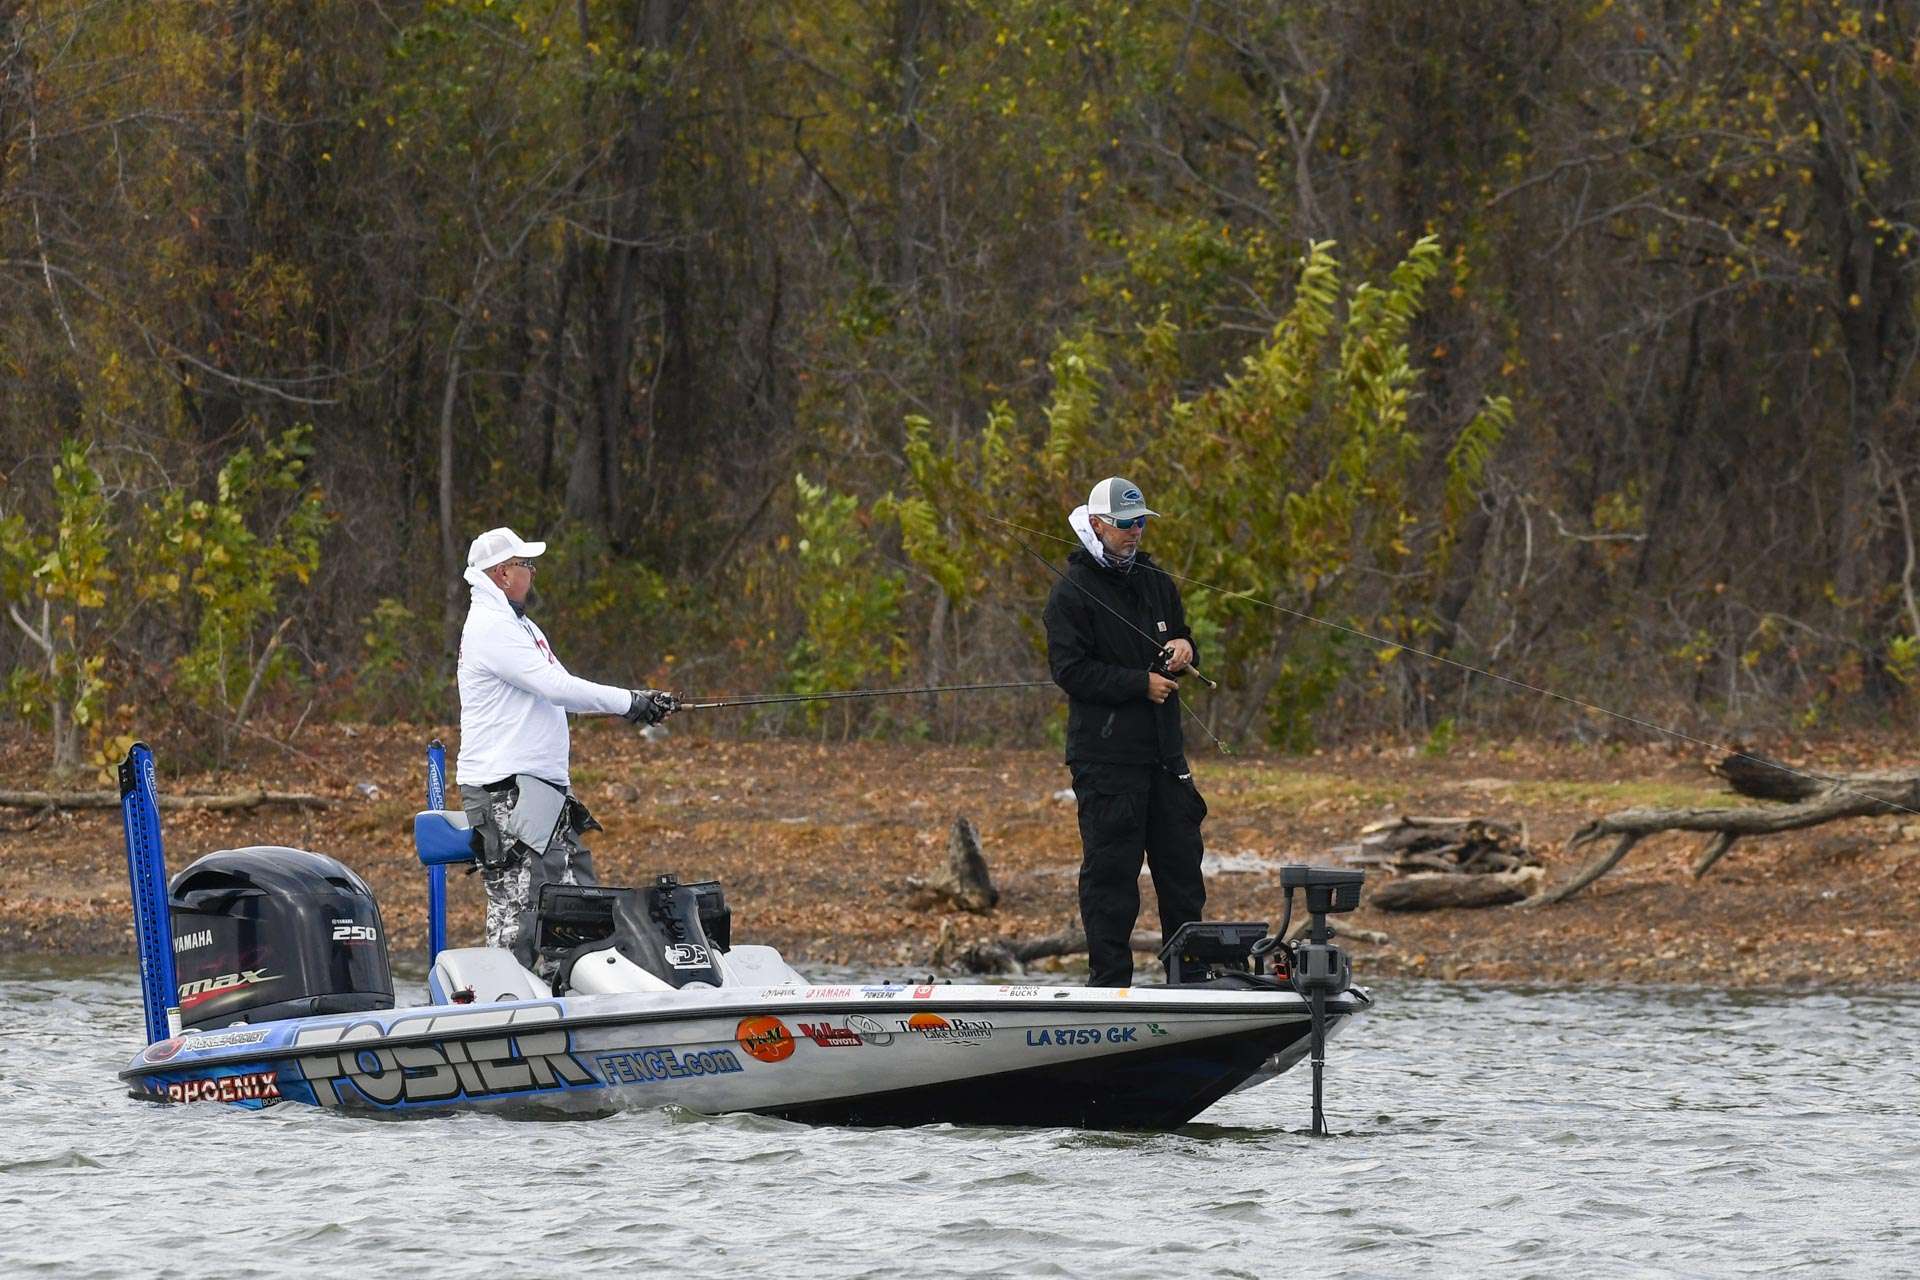 See how Darold Gleason fared during Day 1 of the Basspro.com Bassmaster Central Open at Lewisville Lake.